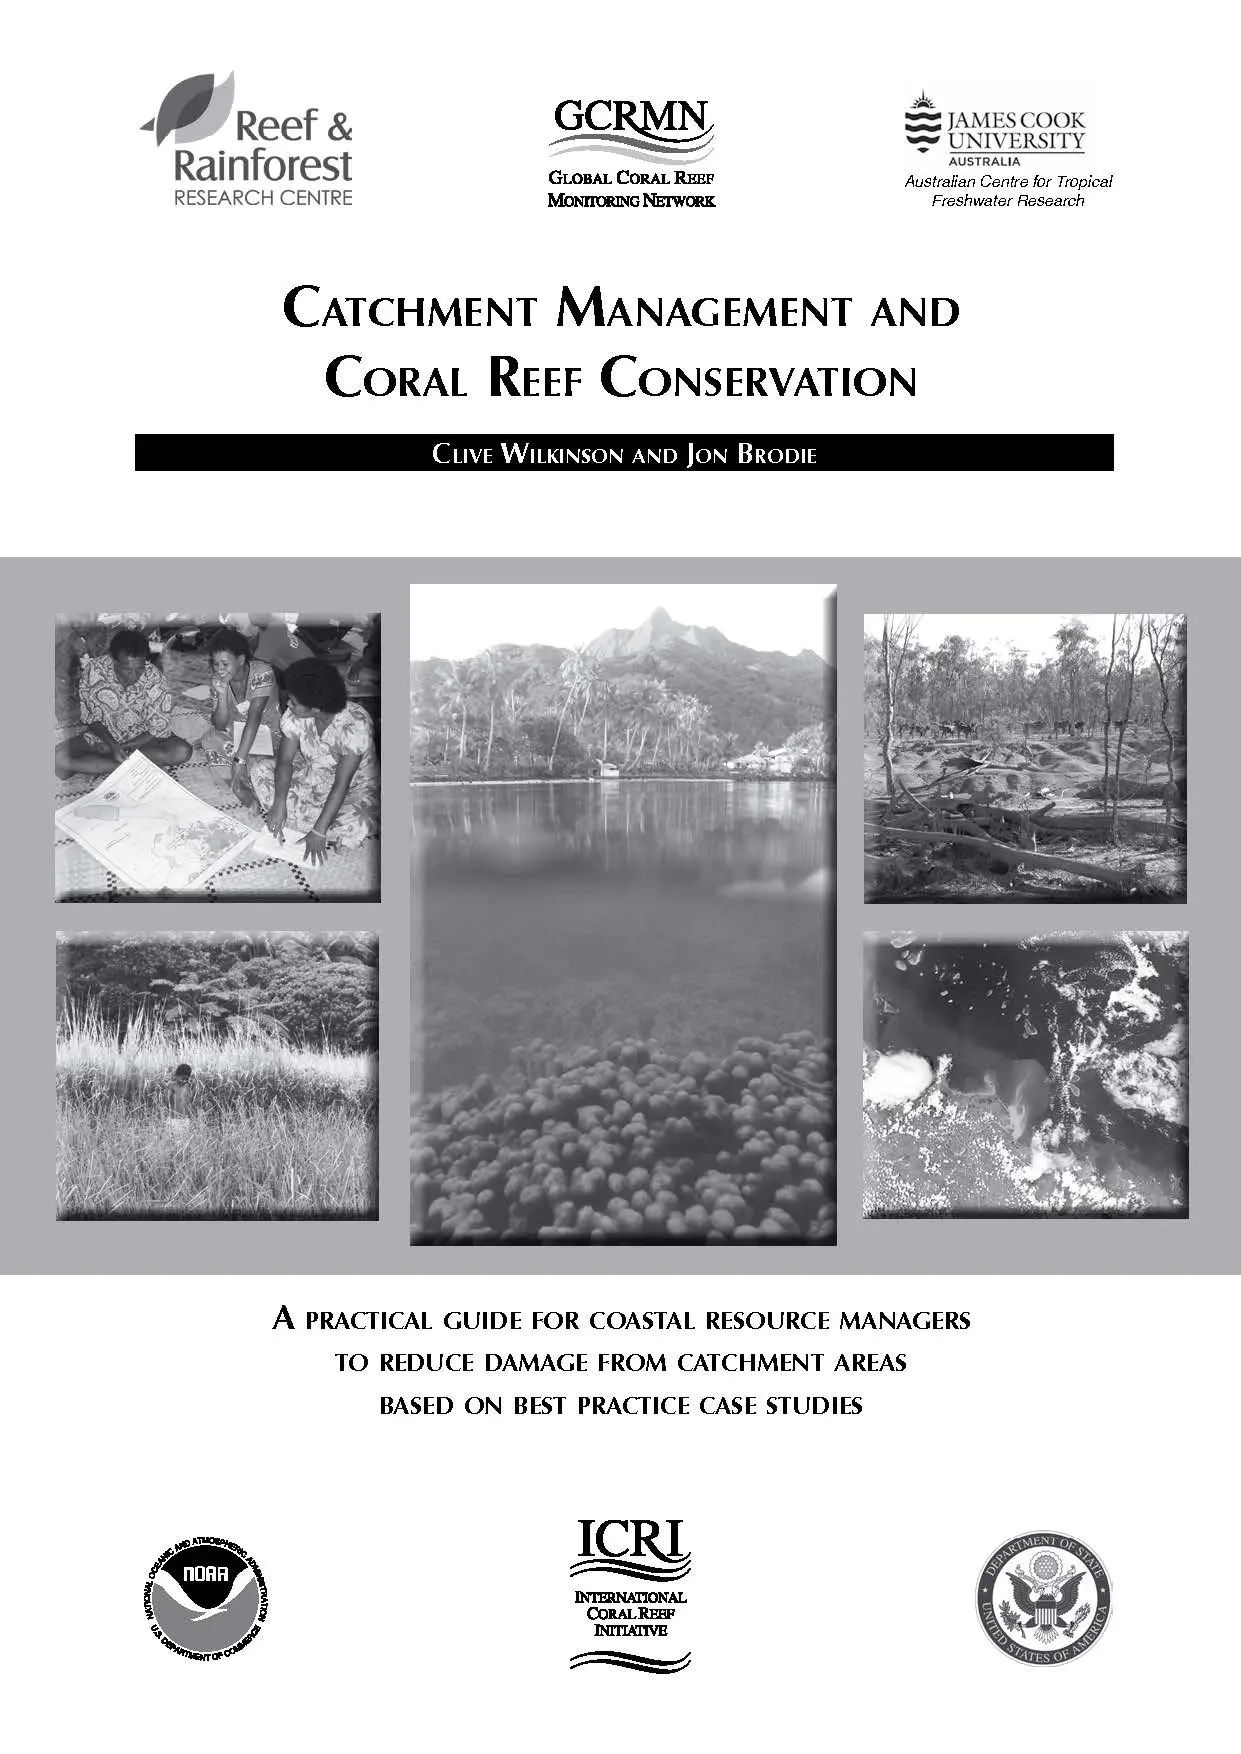 Catchment management and coral reef conservation